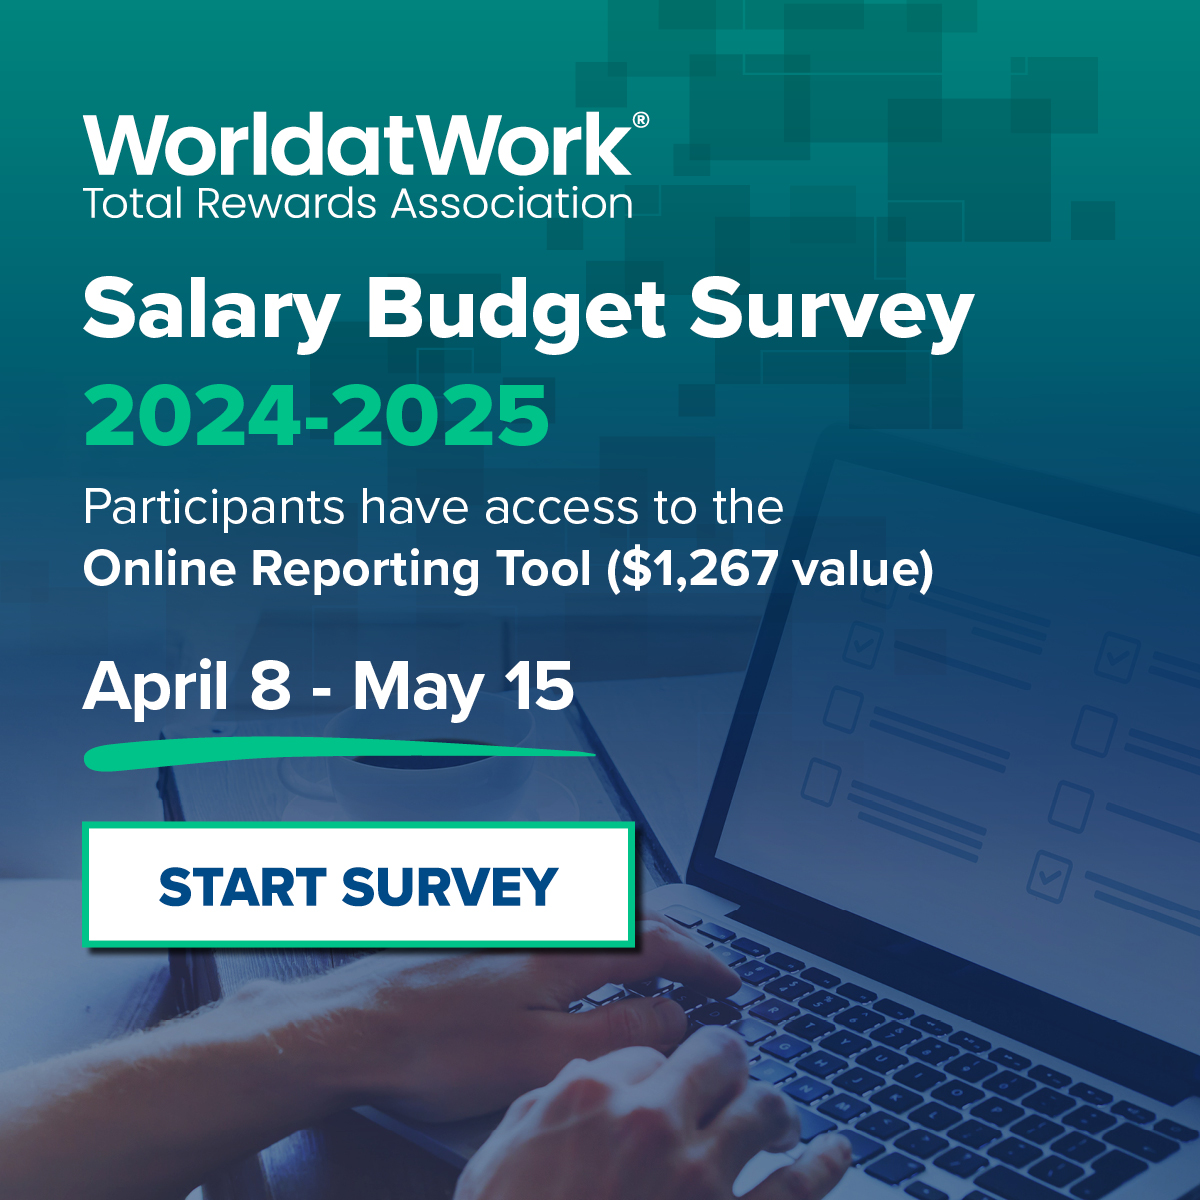 Calling all #HR Leaders! Participate in @WorldatWork's Salary Budget Survey to unlock FREE global #compensation insights from 25 countries. Shape your strategies & save 70% on the Online Reporting Tool. Enhance your decisions now! bit.ly/4aV0kZc #StrategicHR #HRData